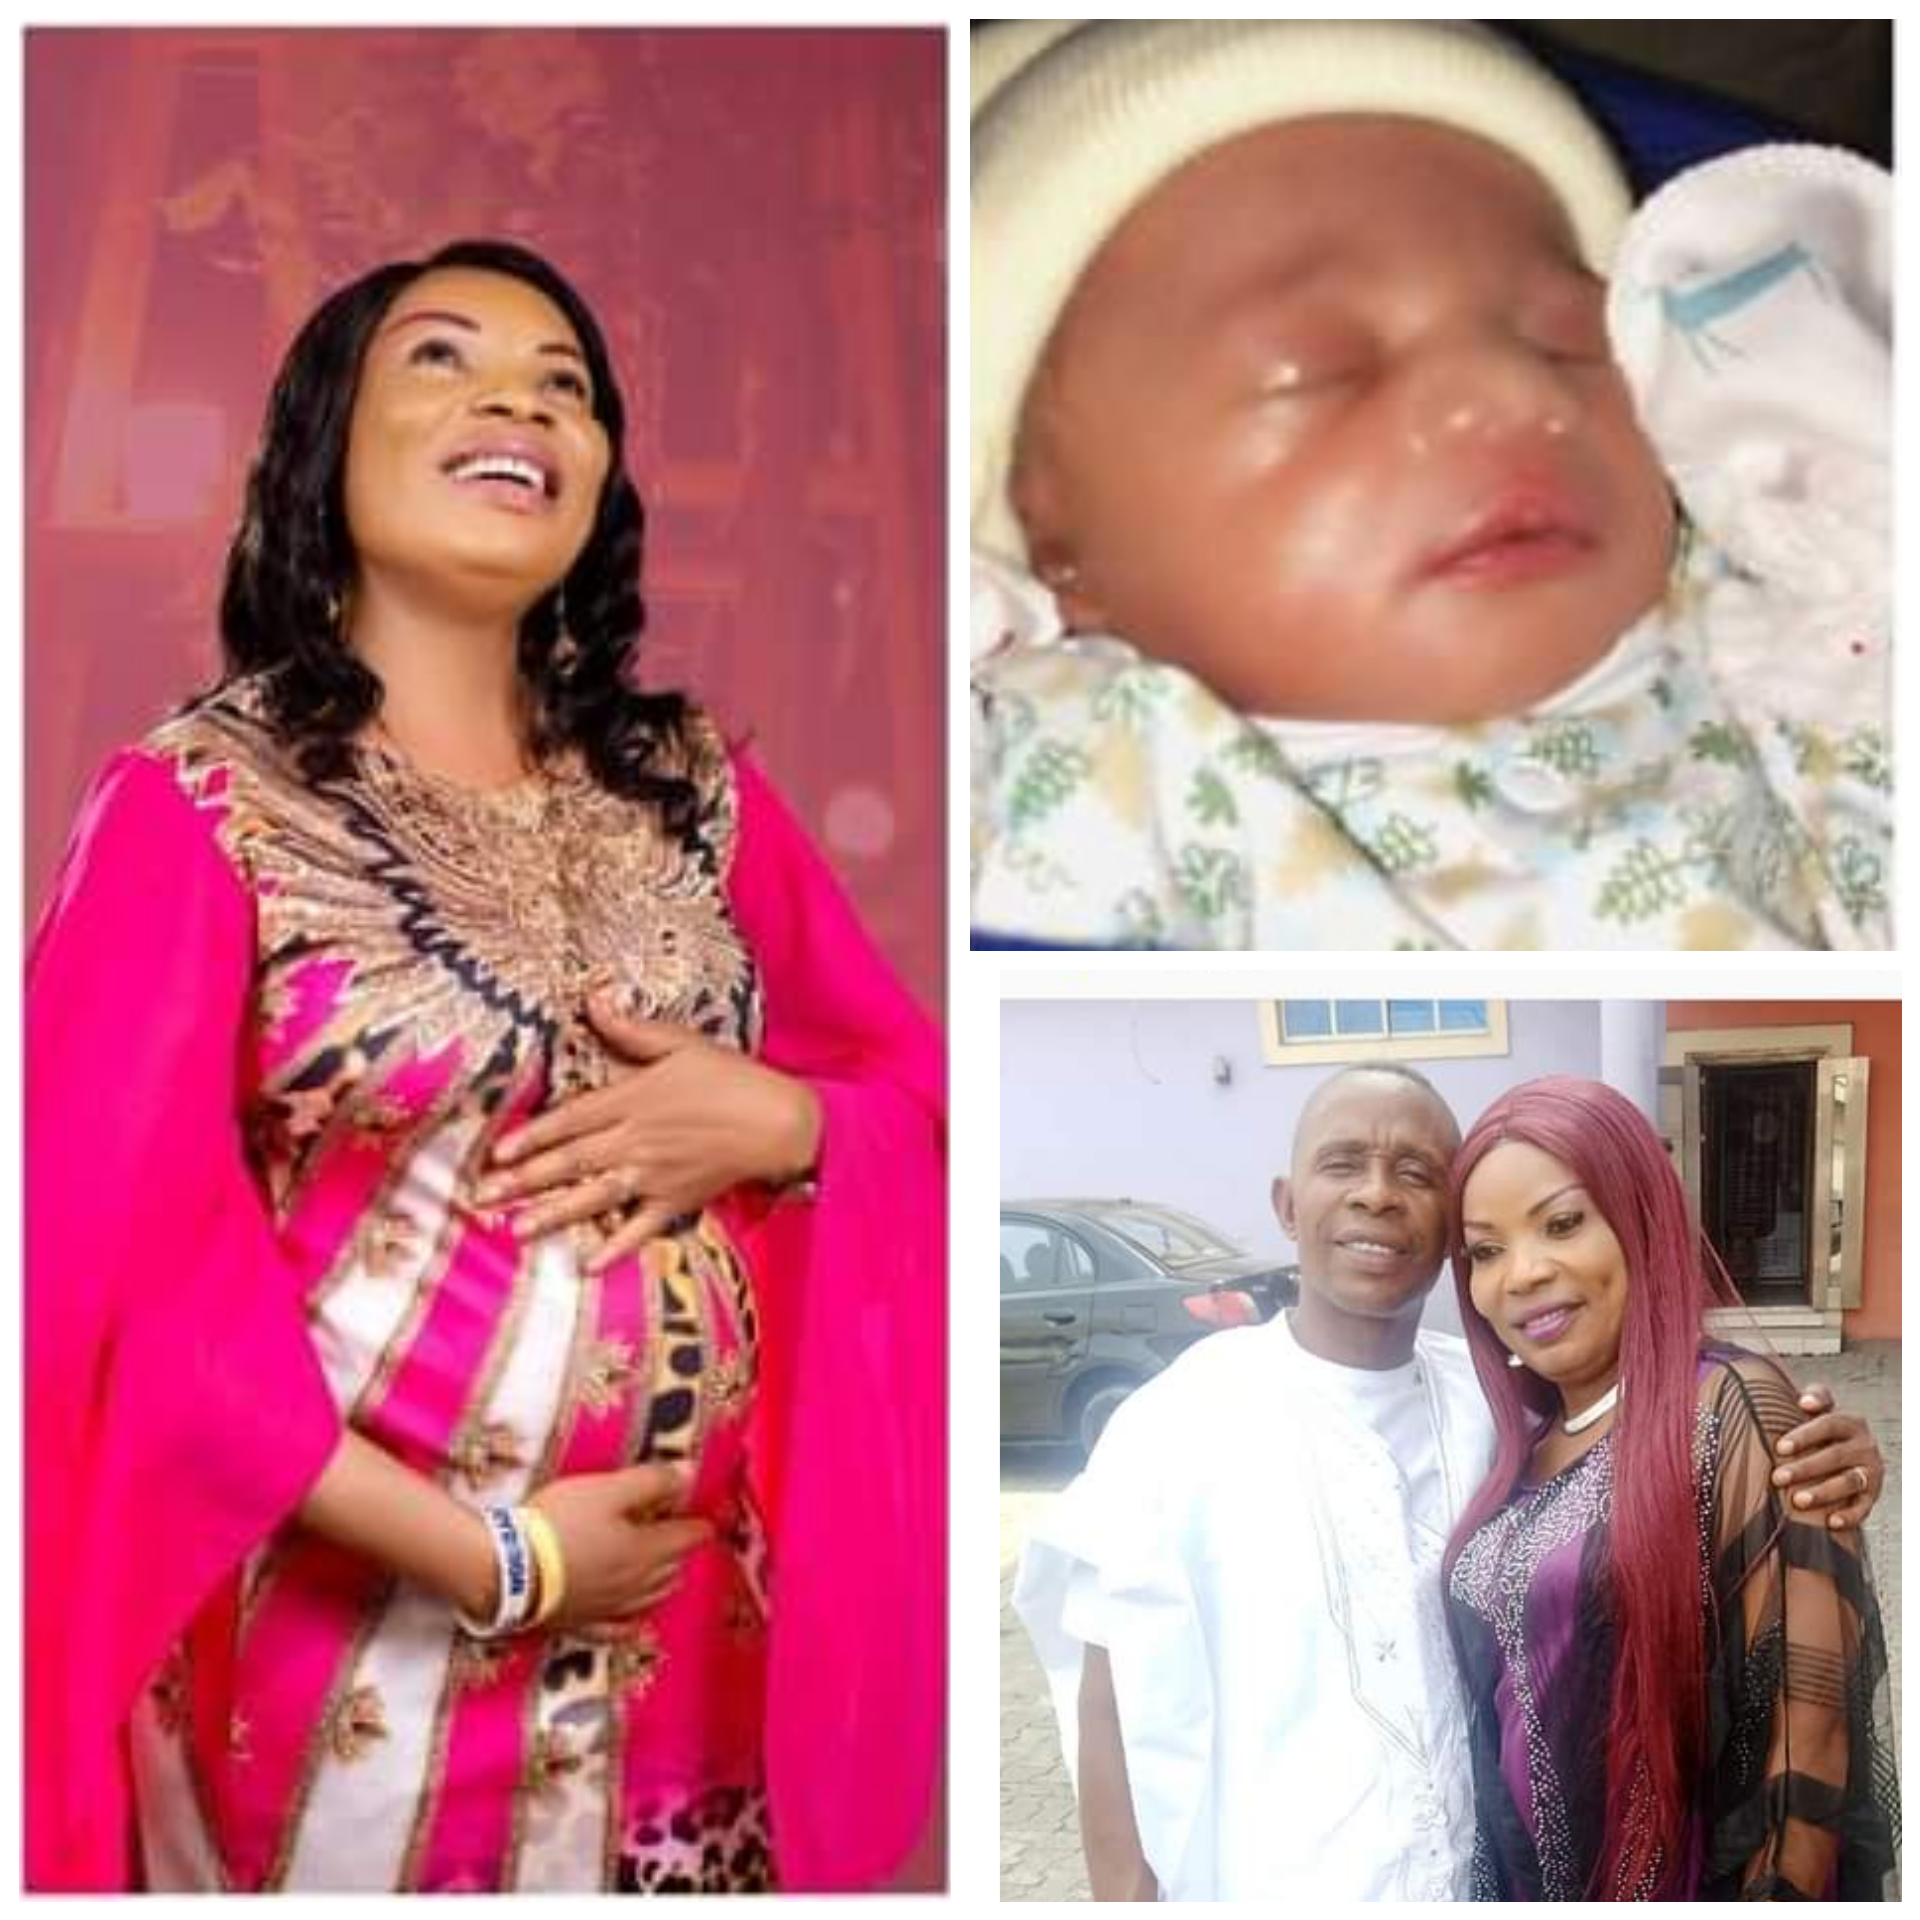 NIGERIAN PASTOR AND HIS WIFE WELCOME THEIR FIRST CHILD AFTER 22 YEARS OF WAITING